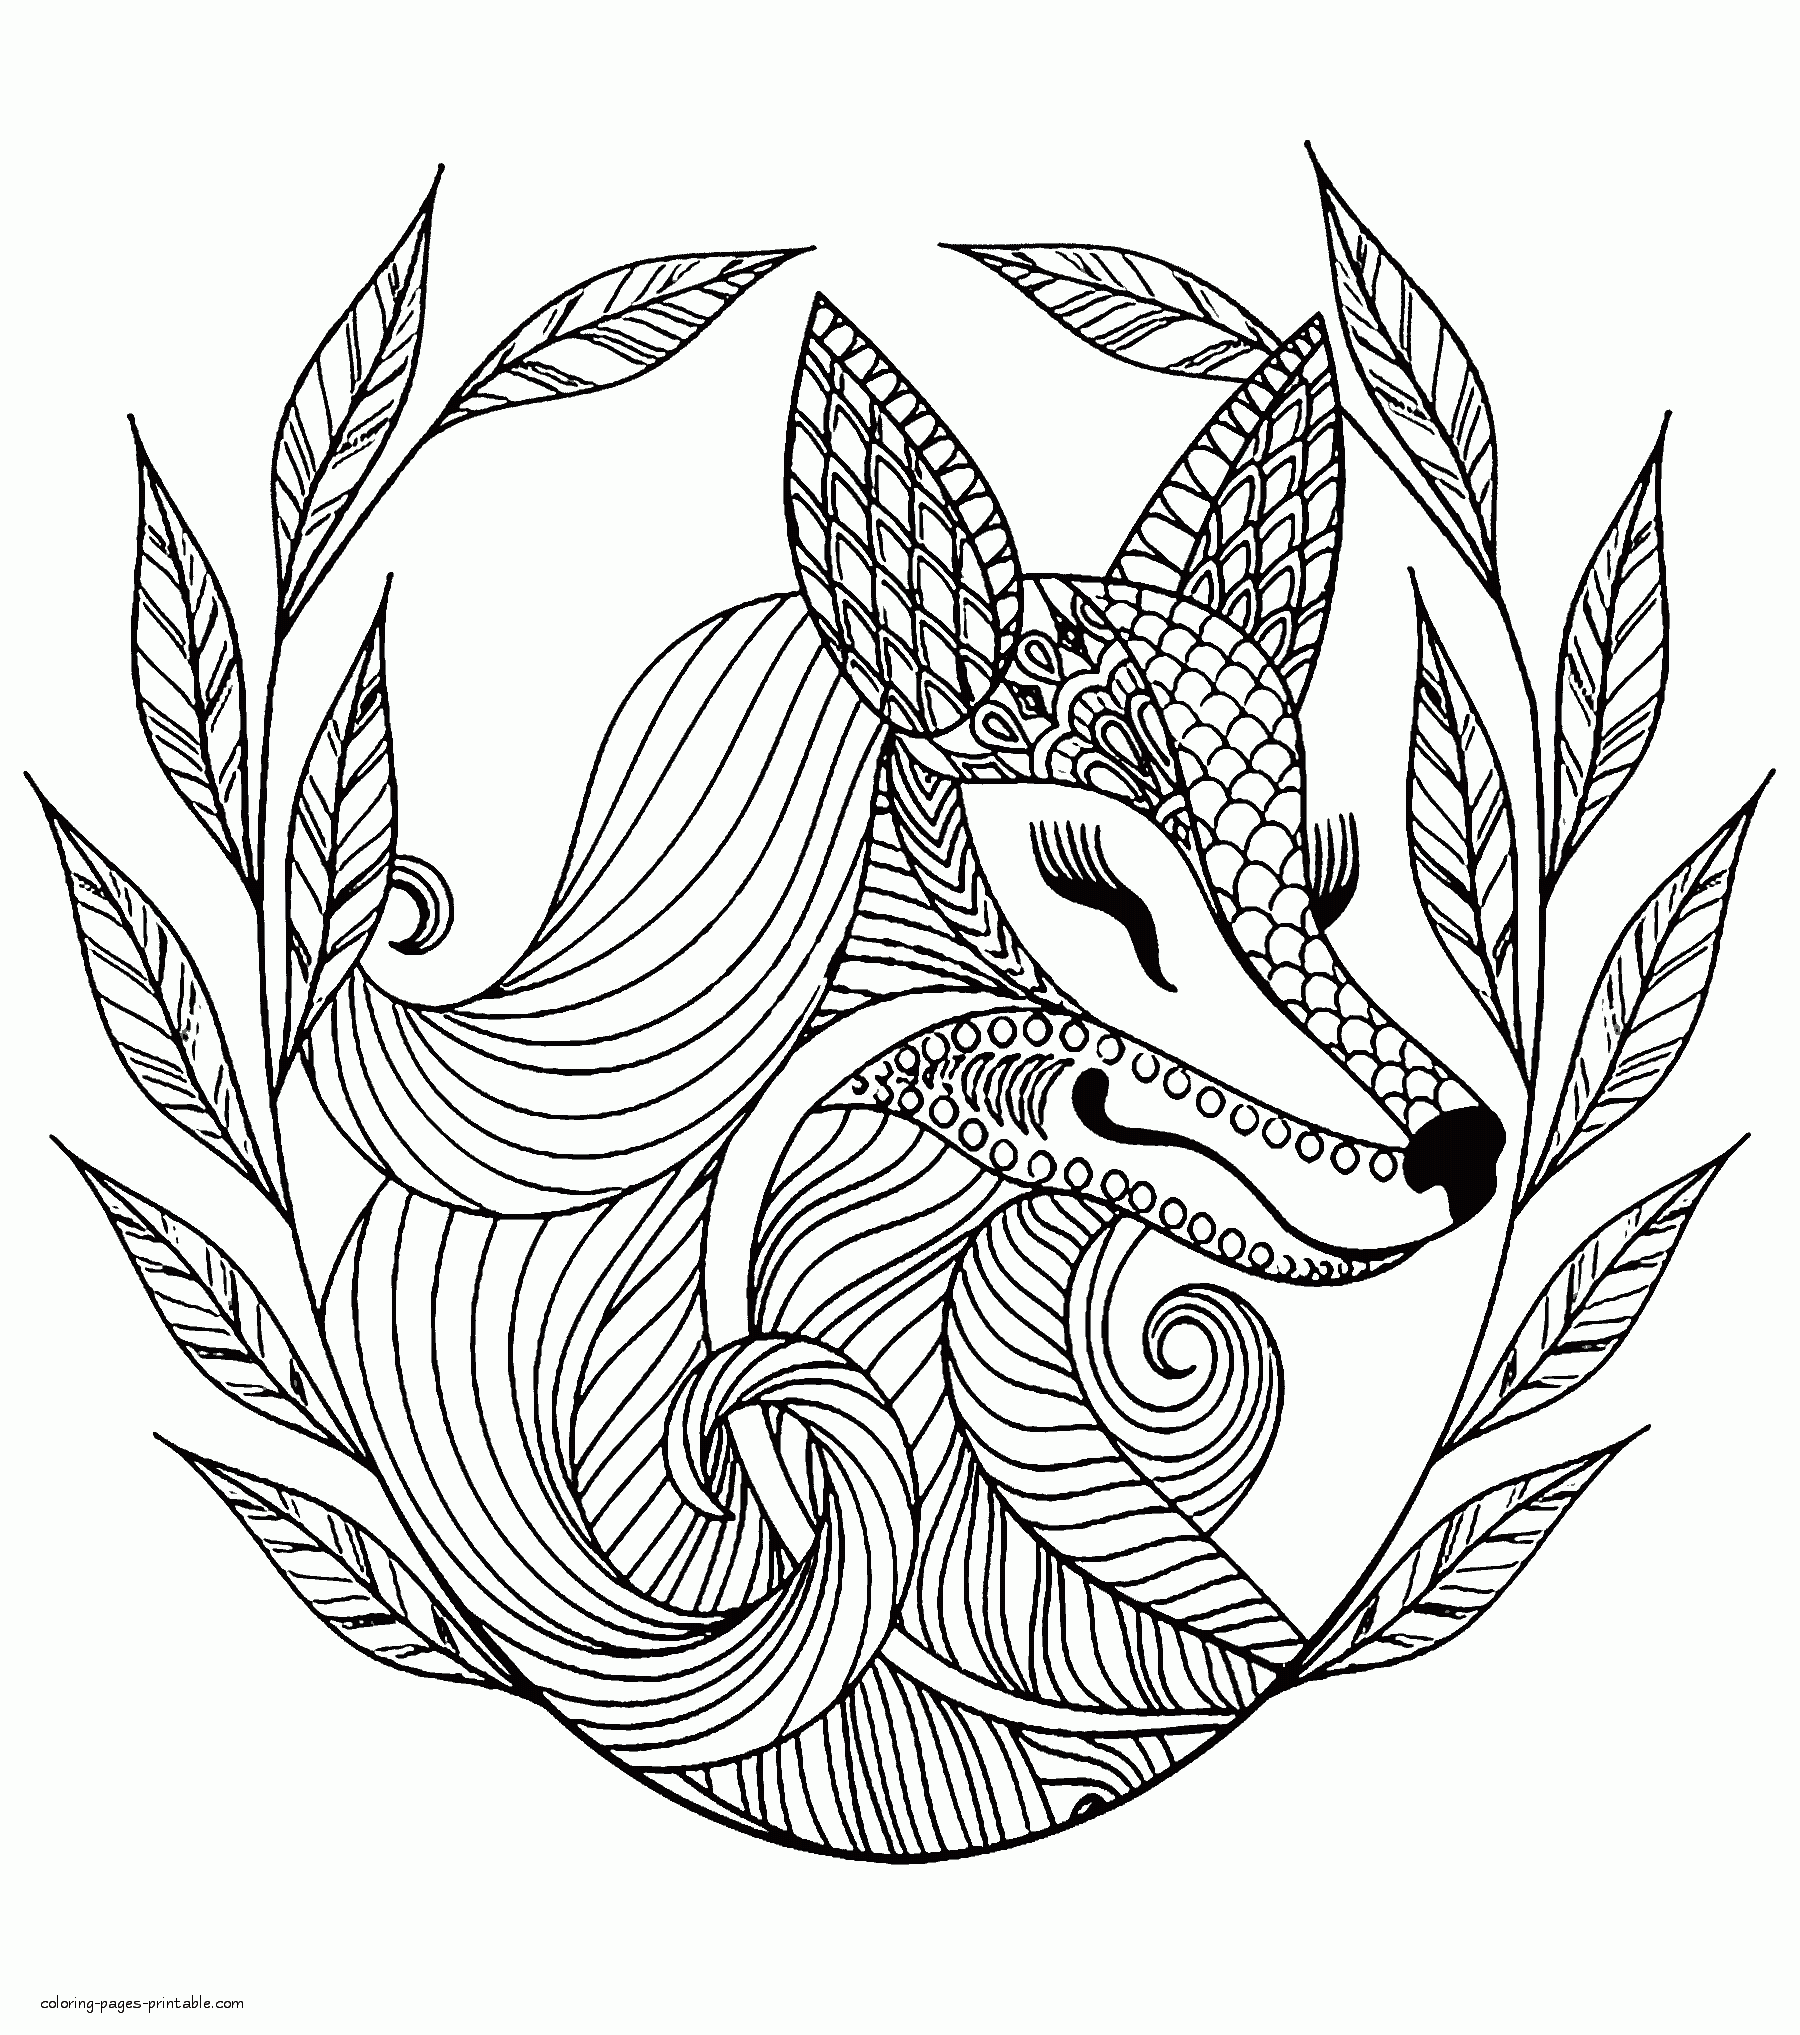 Cute Animal Colouring Pages. A Fox    COLORING PAGES PRINTABLE.COM